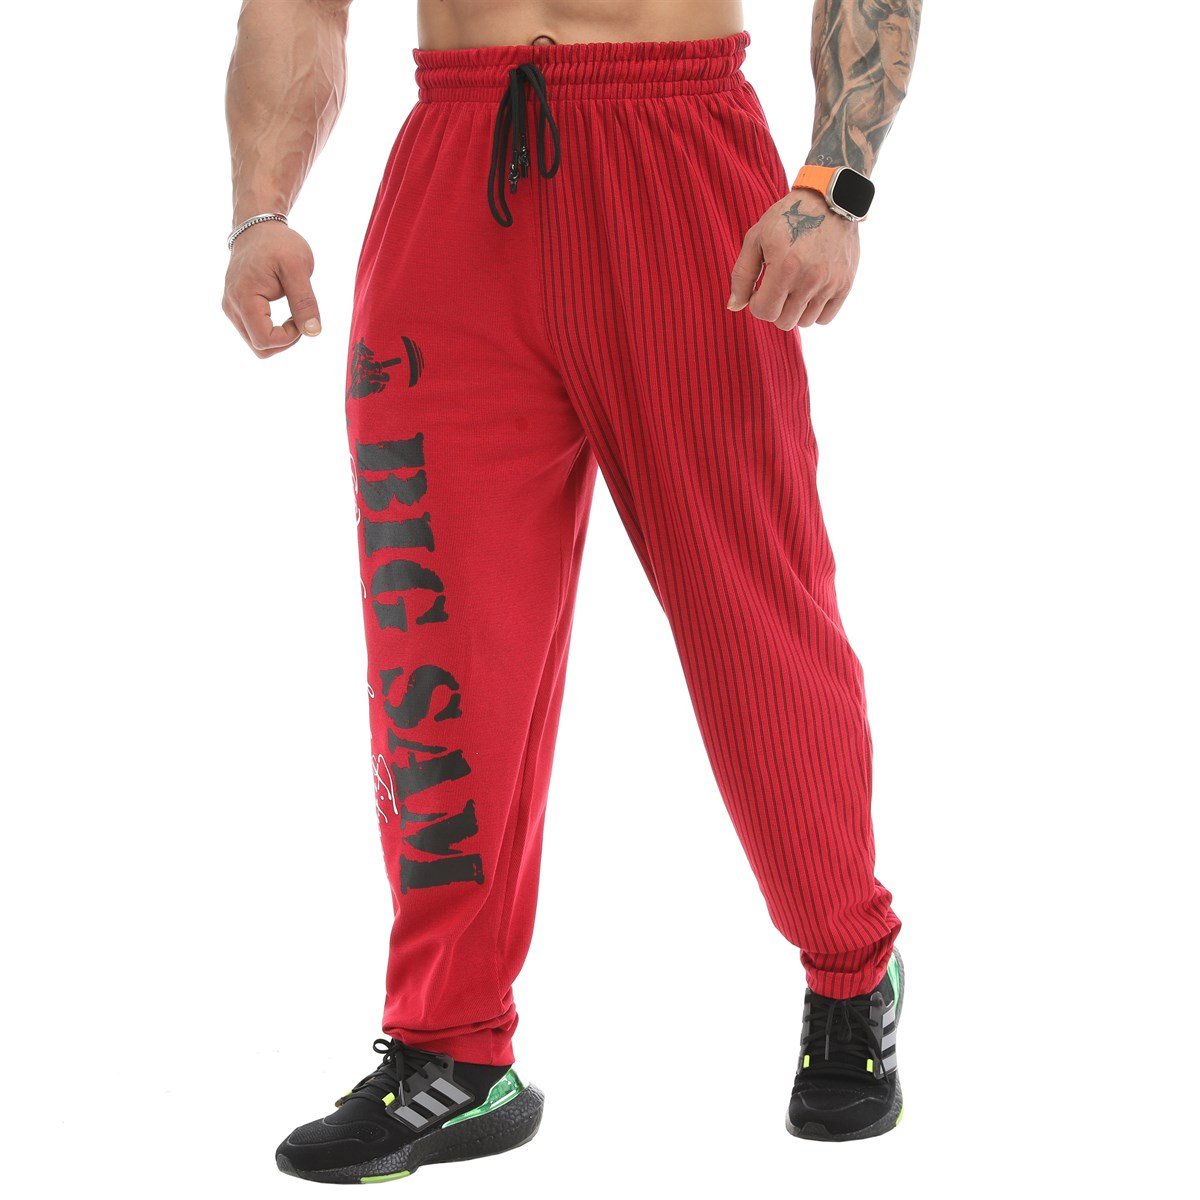 New Tattoo design baggy workout gym pants!  Body Beautiful Nutrition 